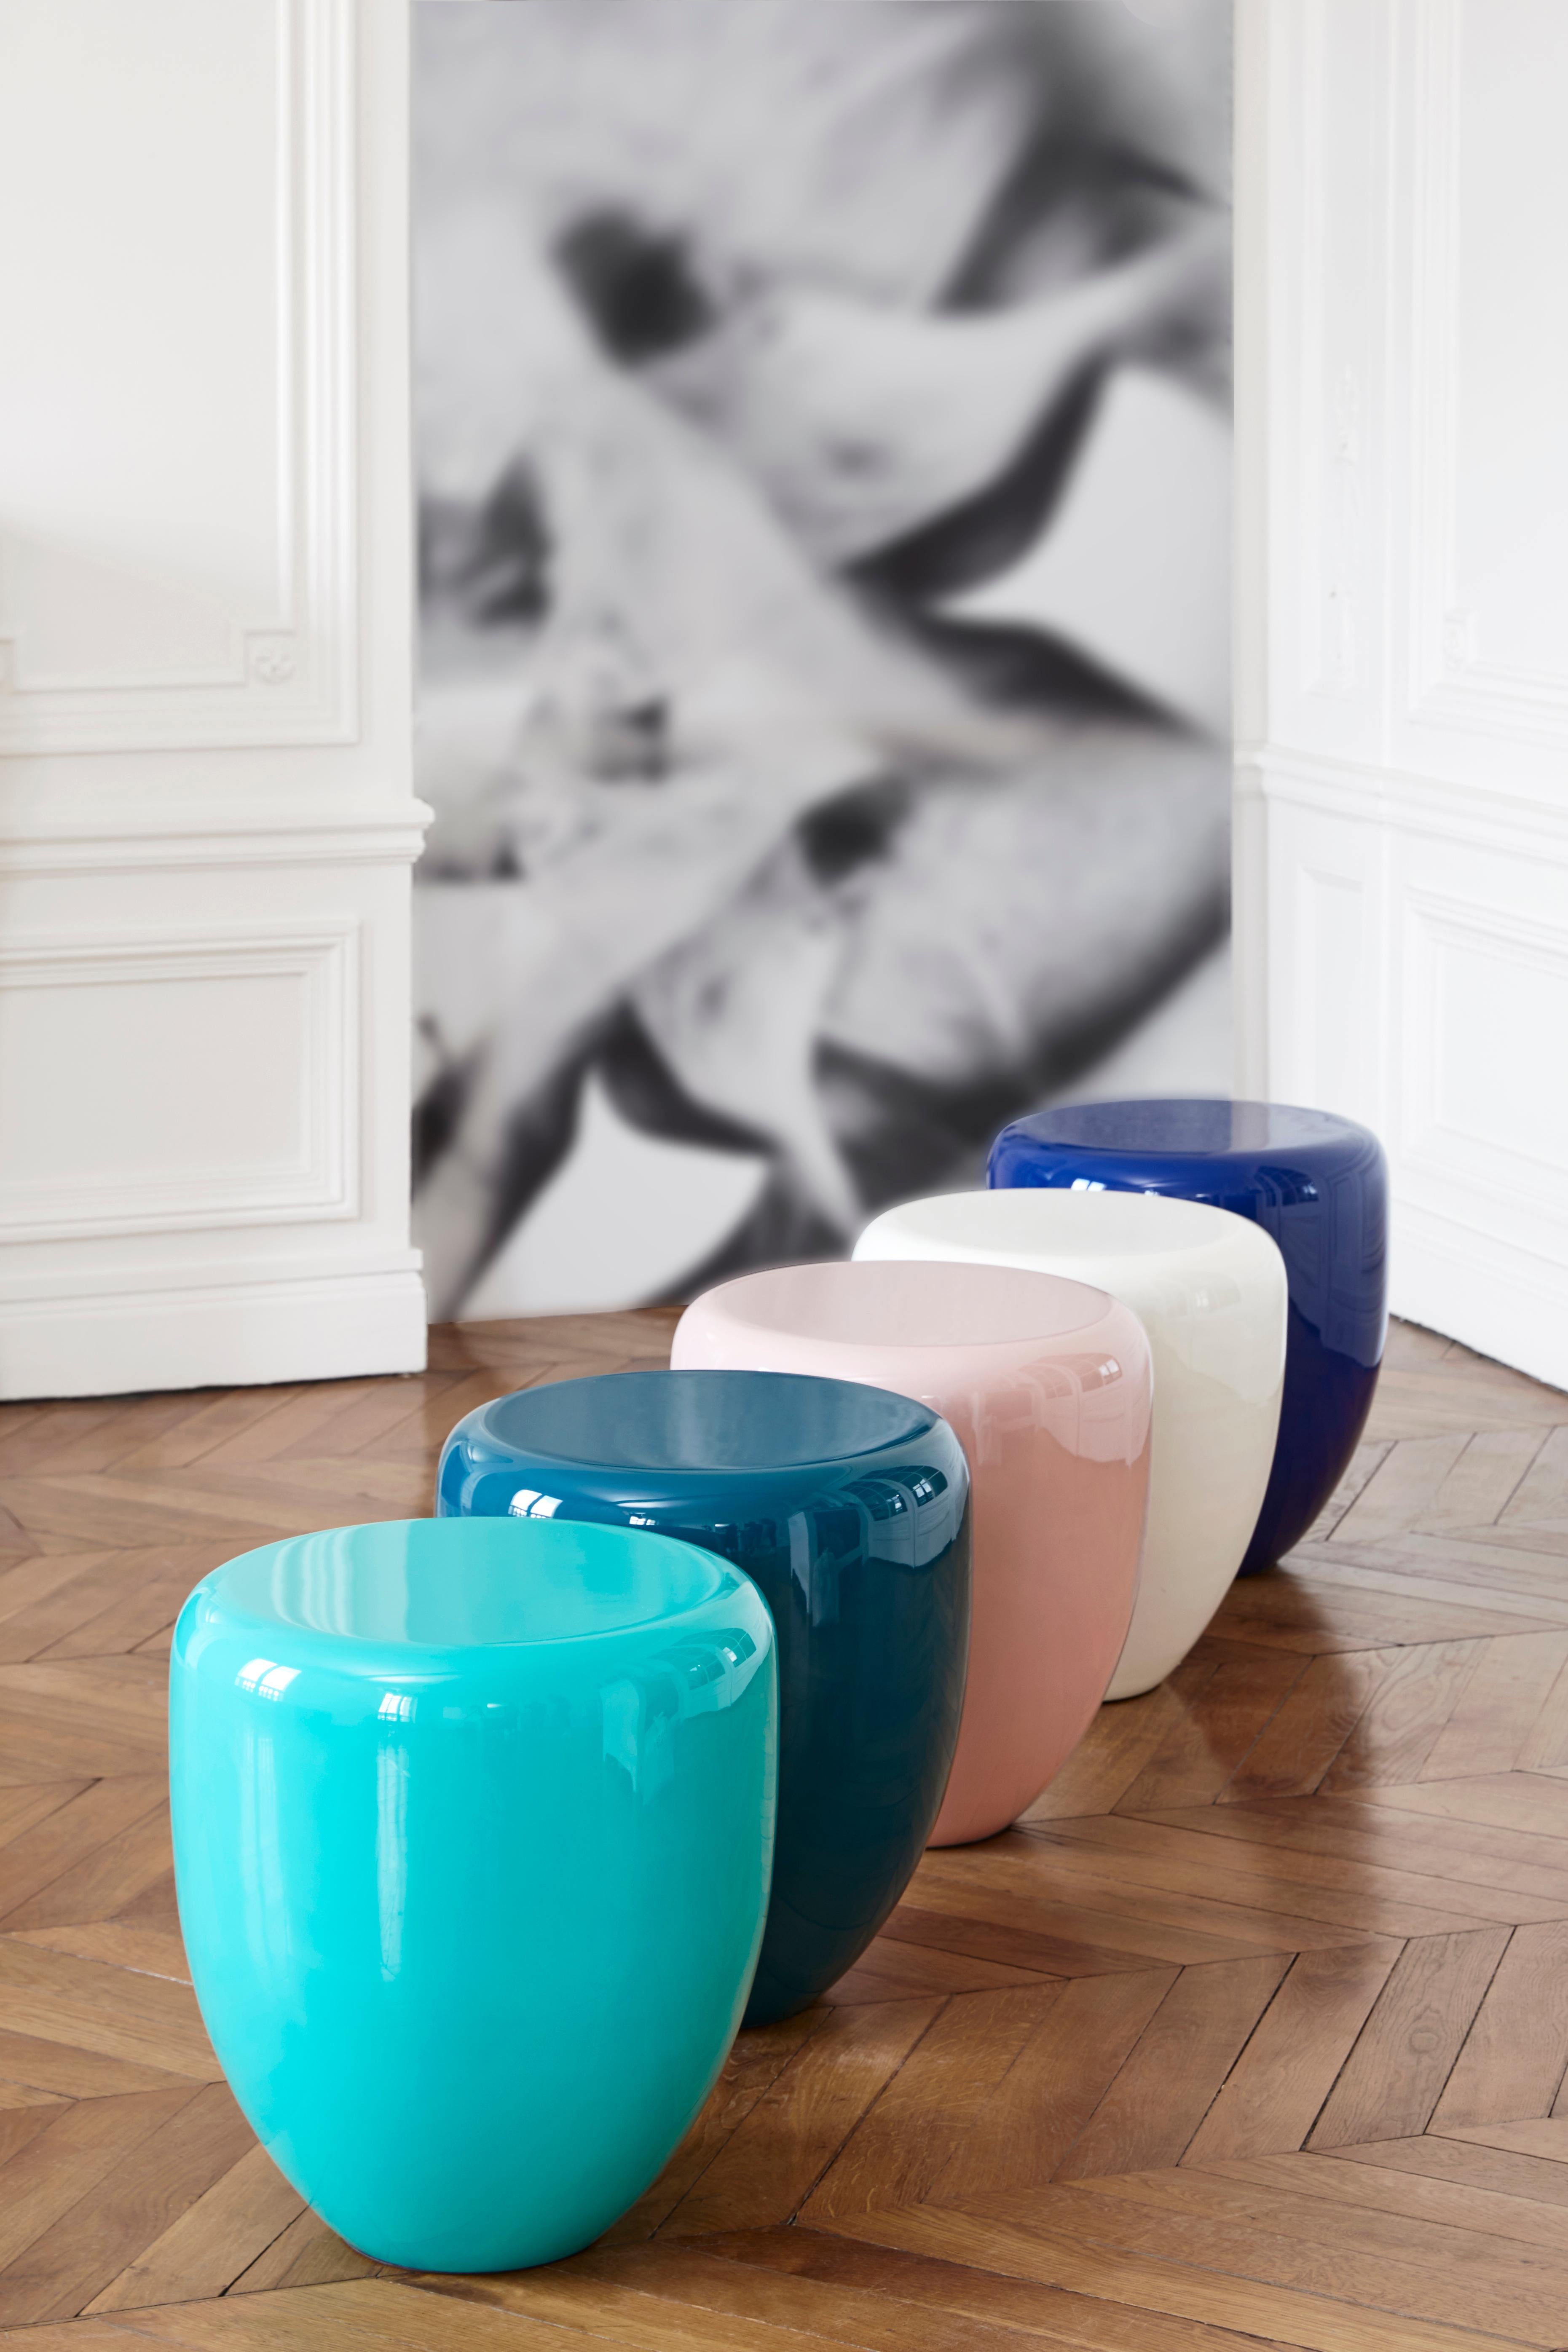 Side Table, Peacock Blue DOT by Reda Amalou, 2018 - Glossy or mate lacquer For Sale 5